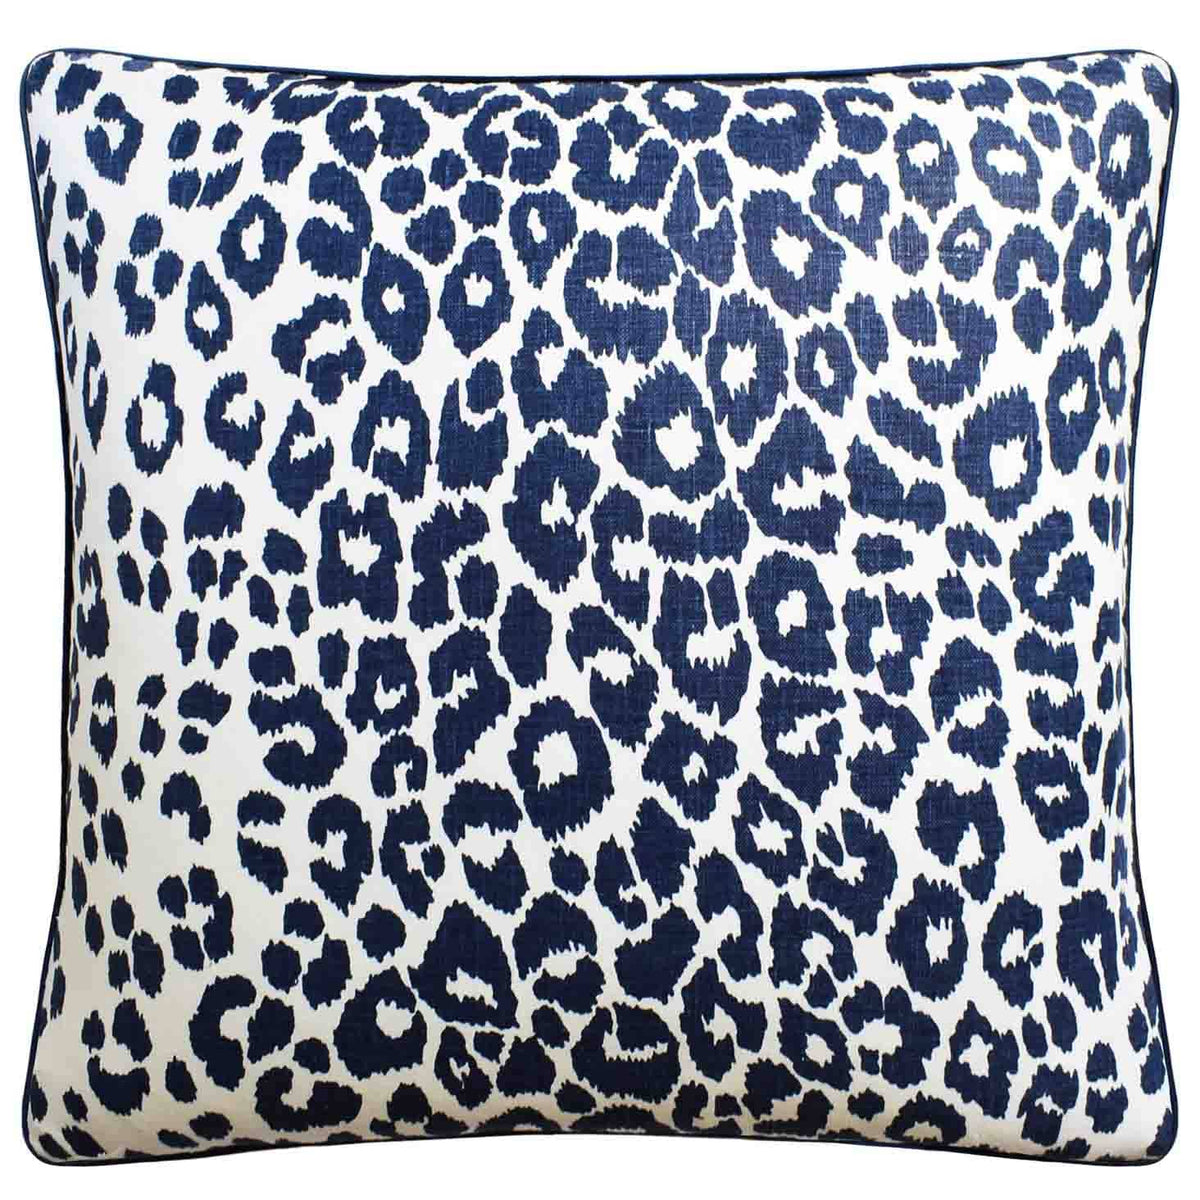 Iconic Leopard Ink - Throw Pillow by Ryan Studio